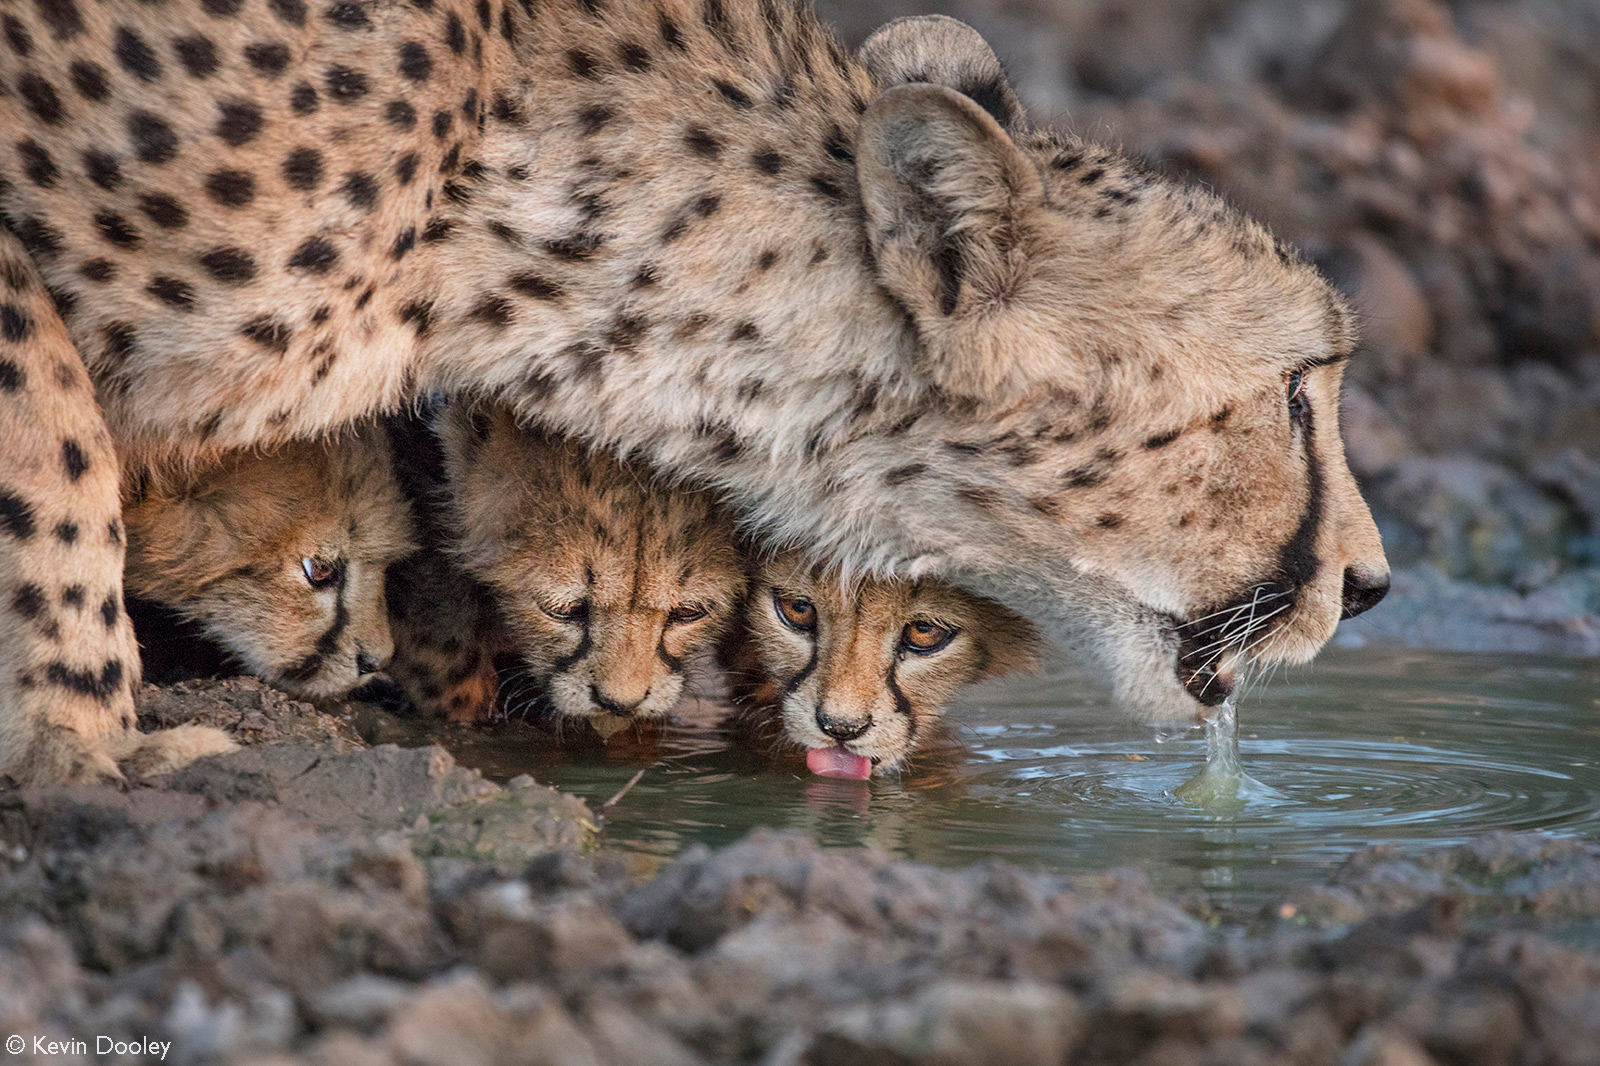 A mother cheetah with her thirsty cubs. Etosha National Park, Namibia © Kevin Dooley